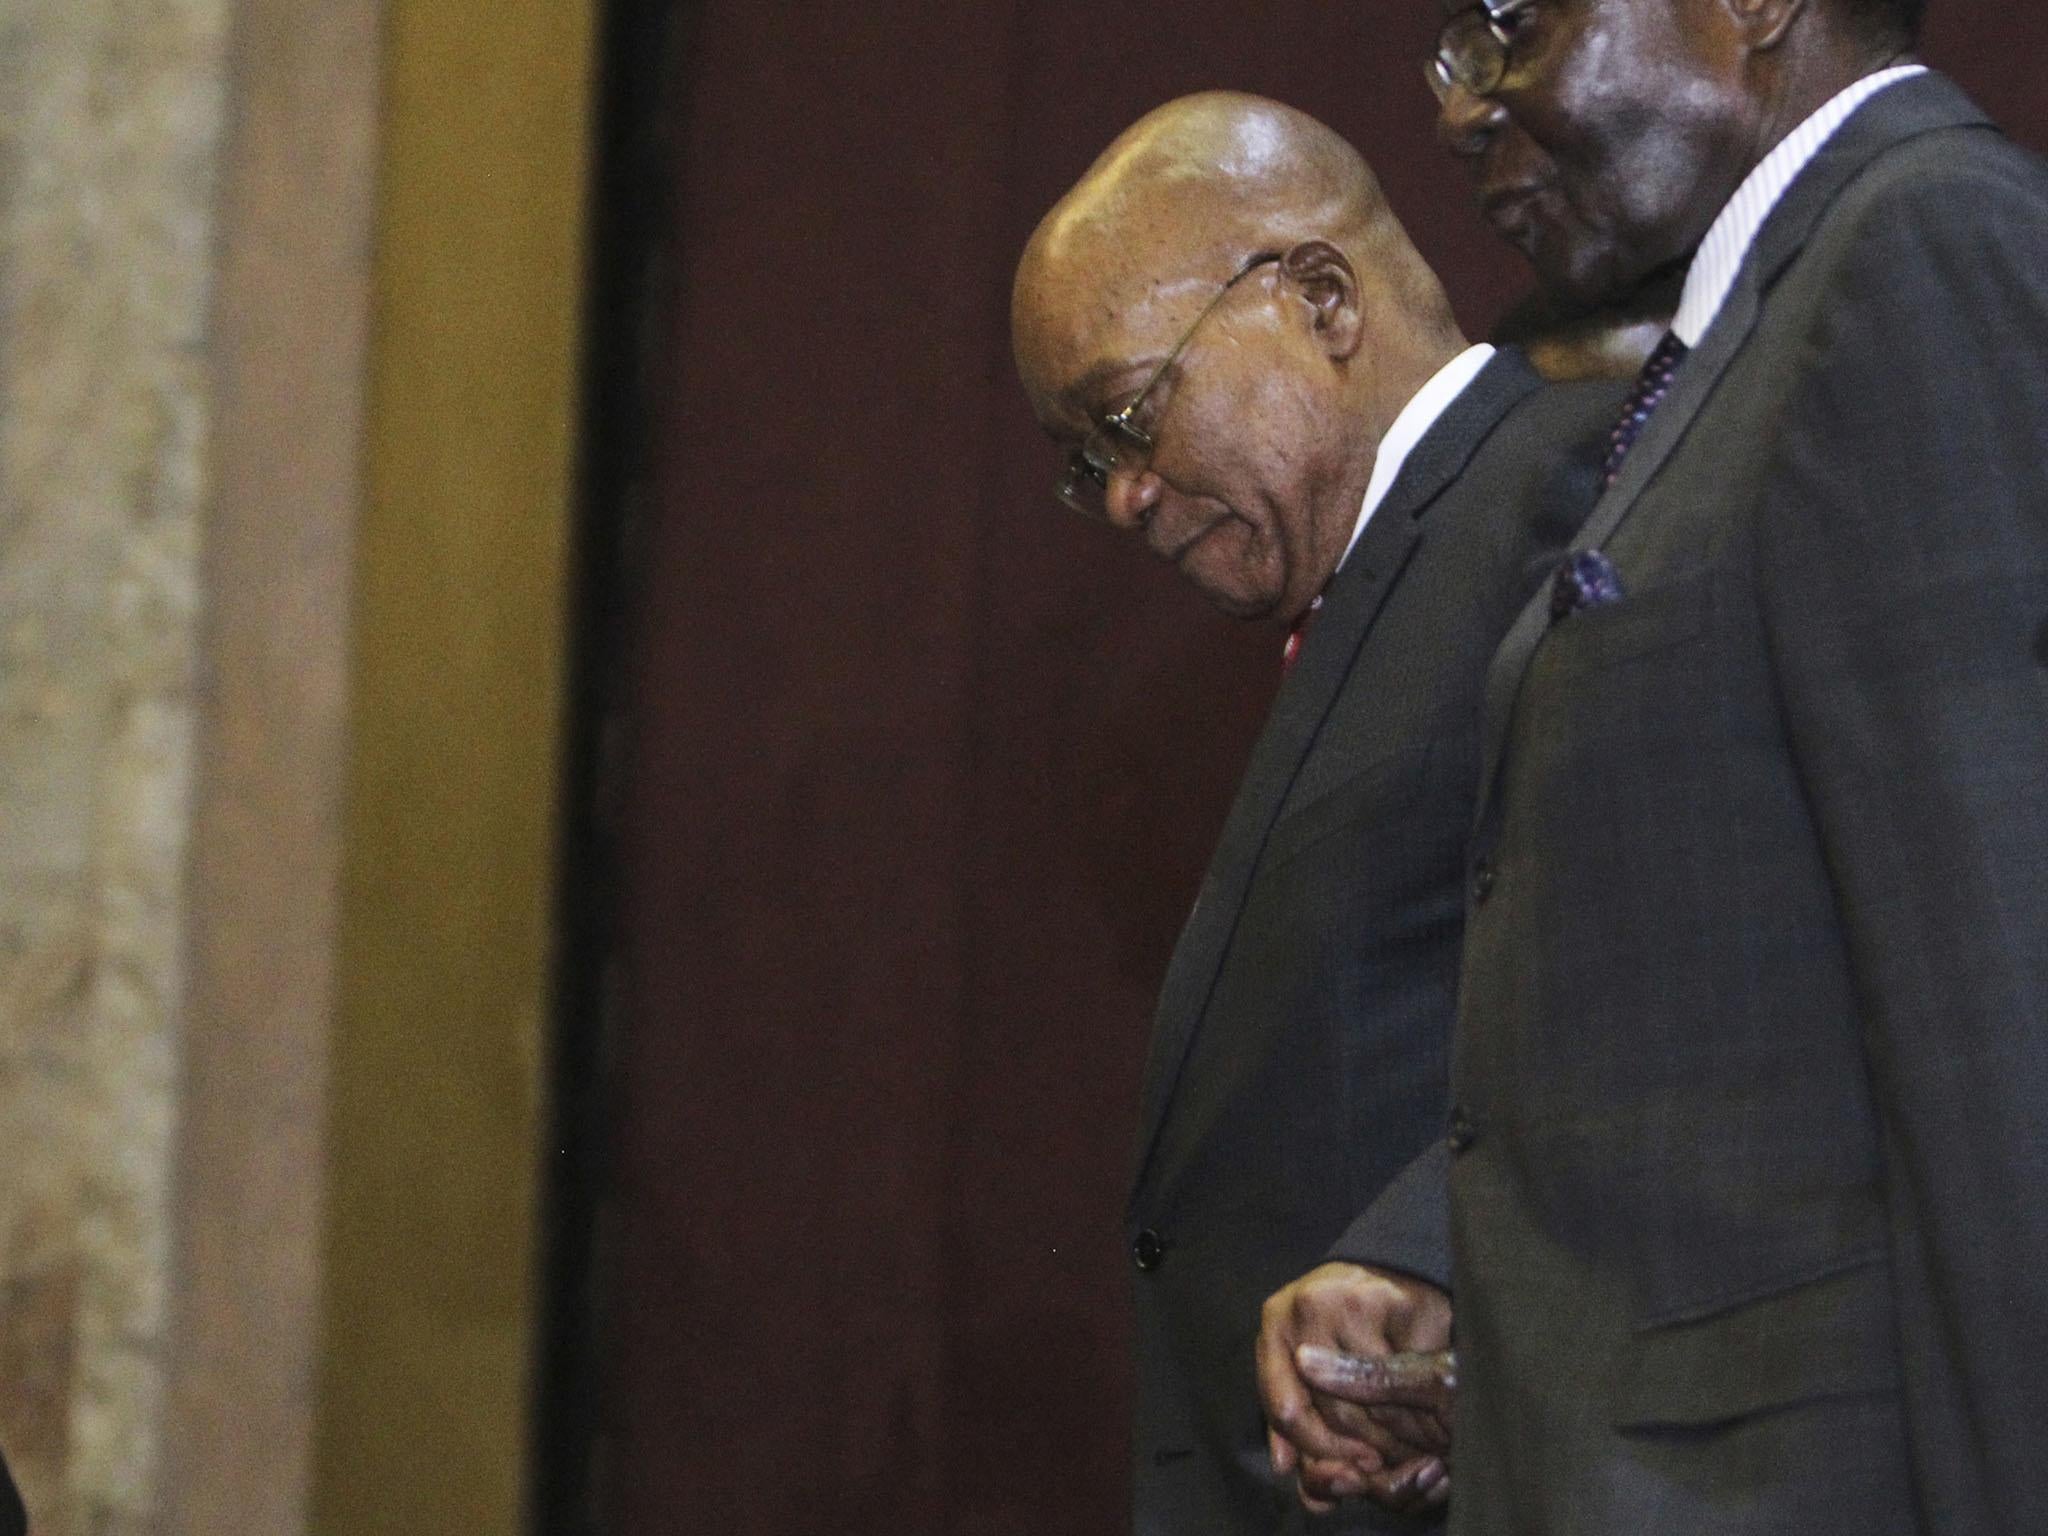 President Zuma meeting with Zimbabwe's Robert Magabe in Harare earlier this month